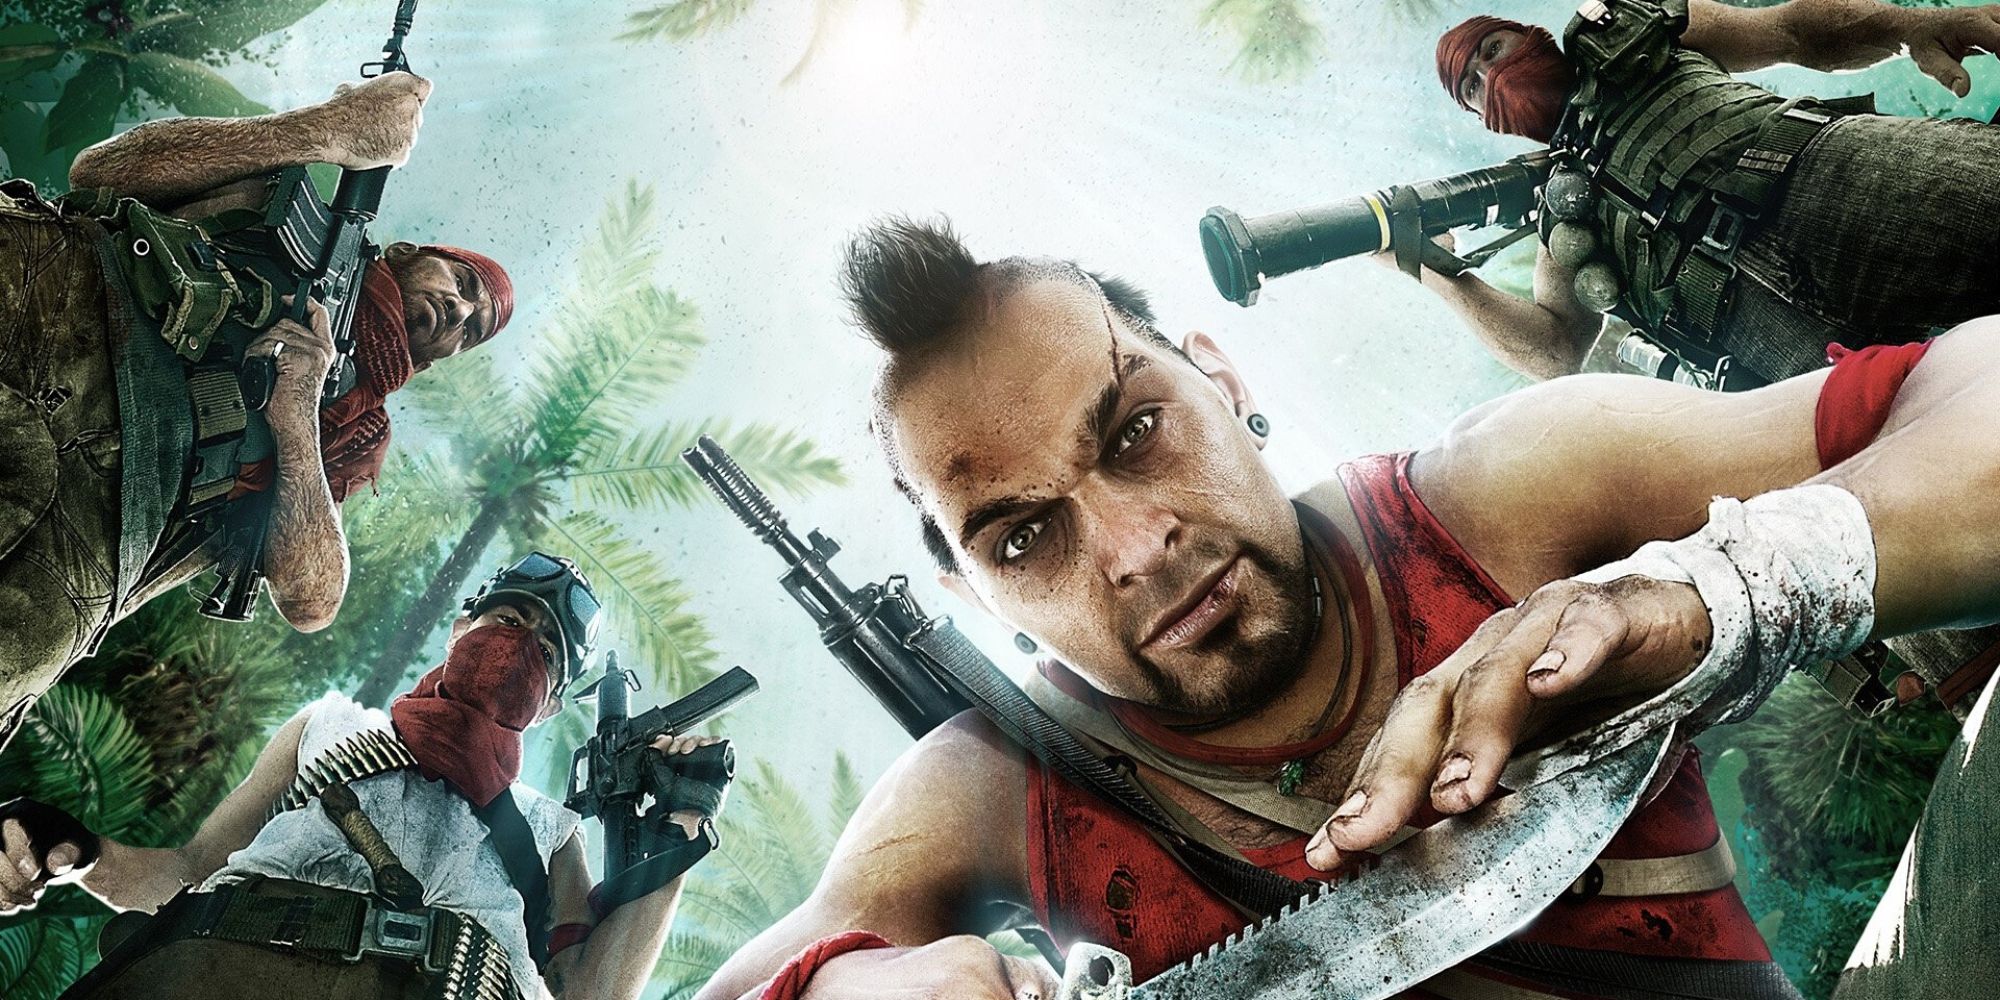 vaas and team in Far Cry 3